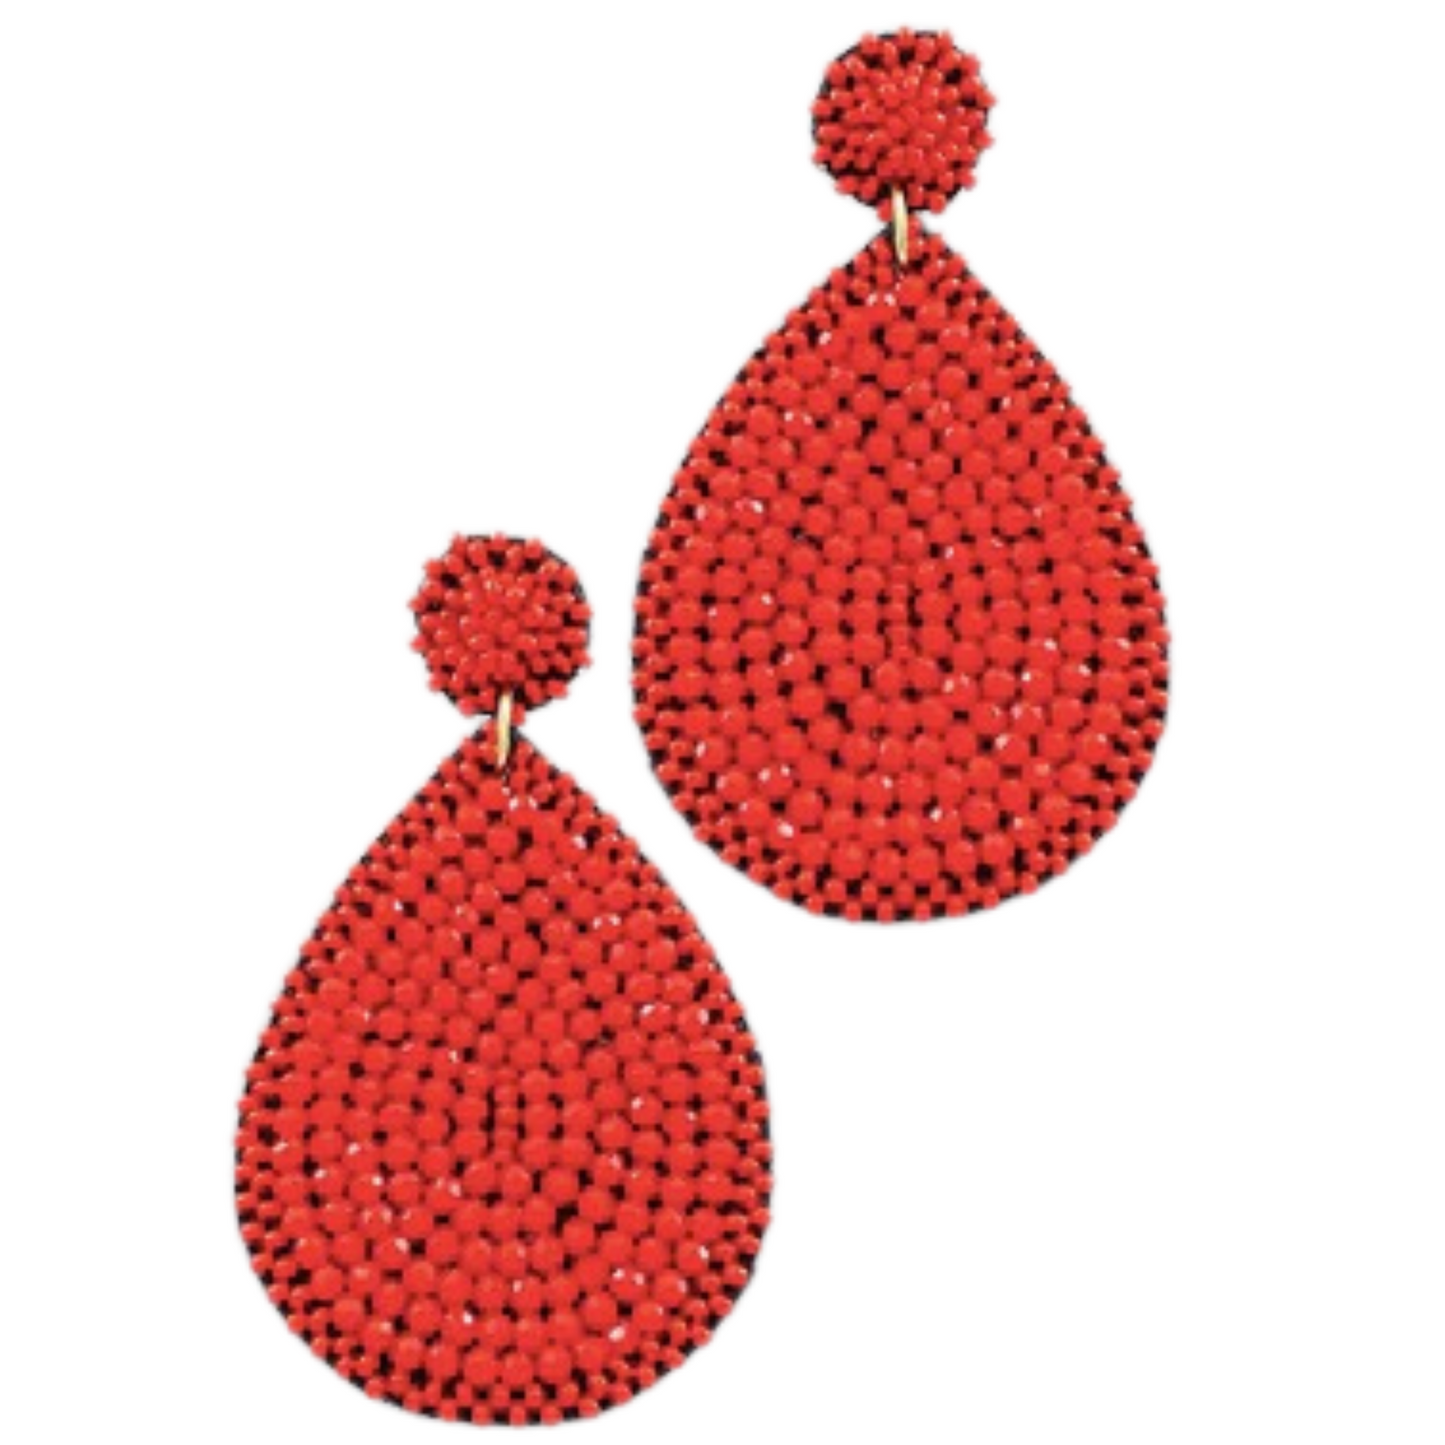 Expertly crafted Glass Bead Teardrop Earrings, in a captivating red color. Each teardrop shape is meticulously designed for a unique dangle effect. Elevate your look with these stunning and elegant earrings.